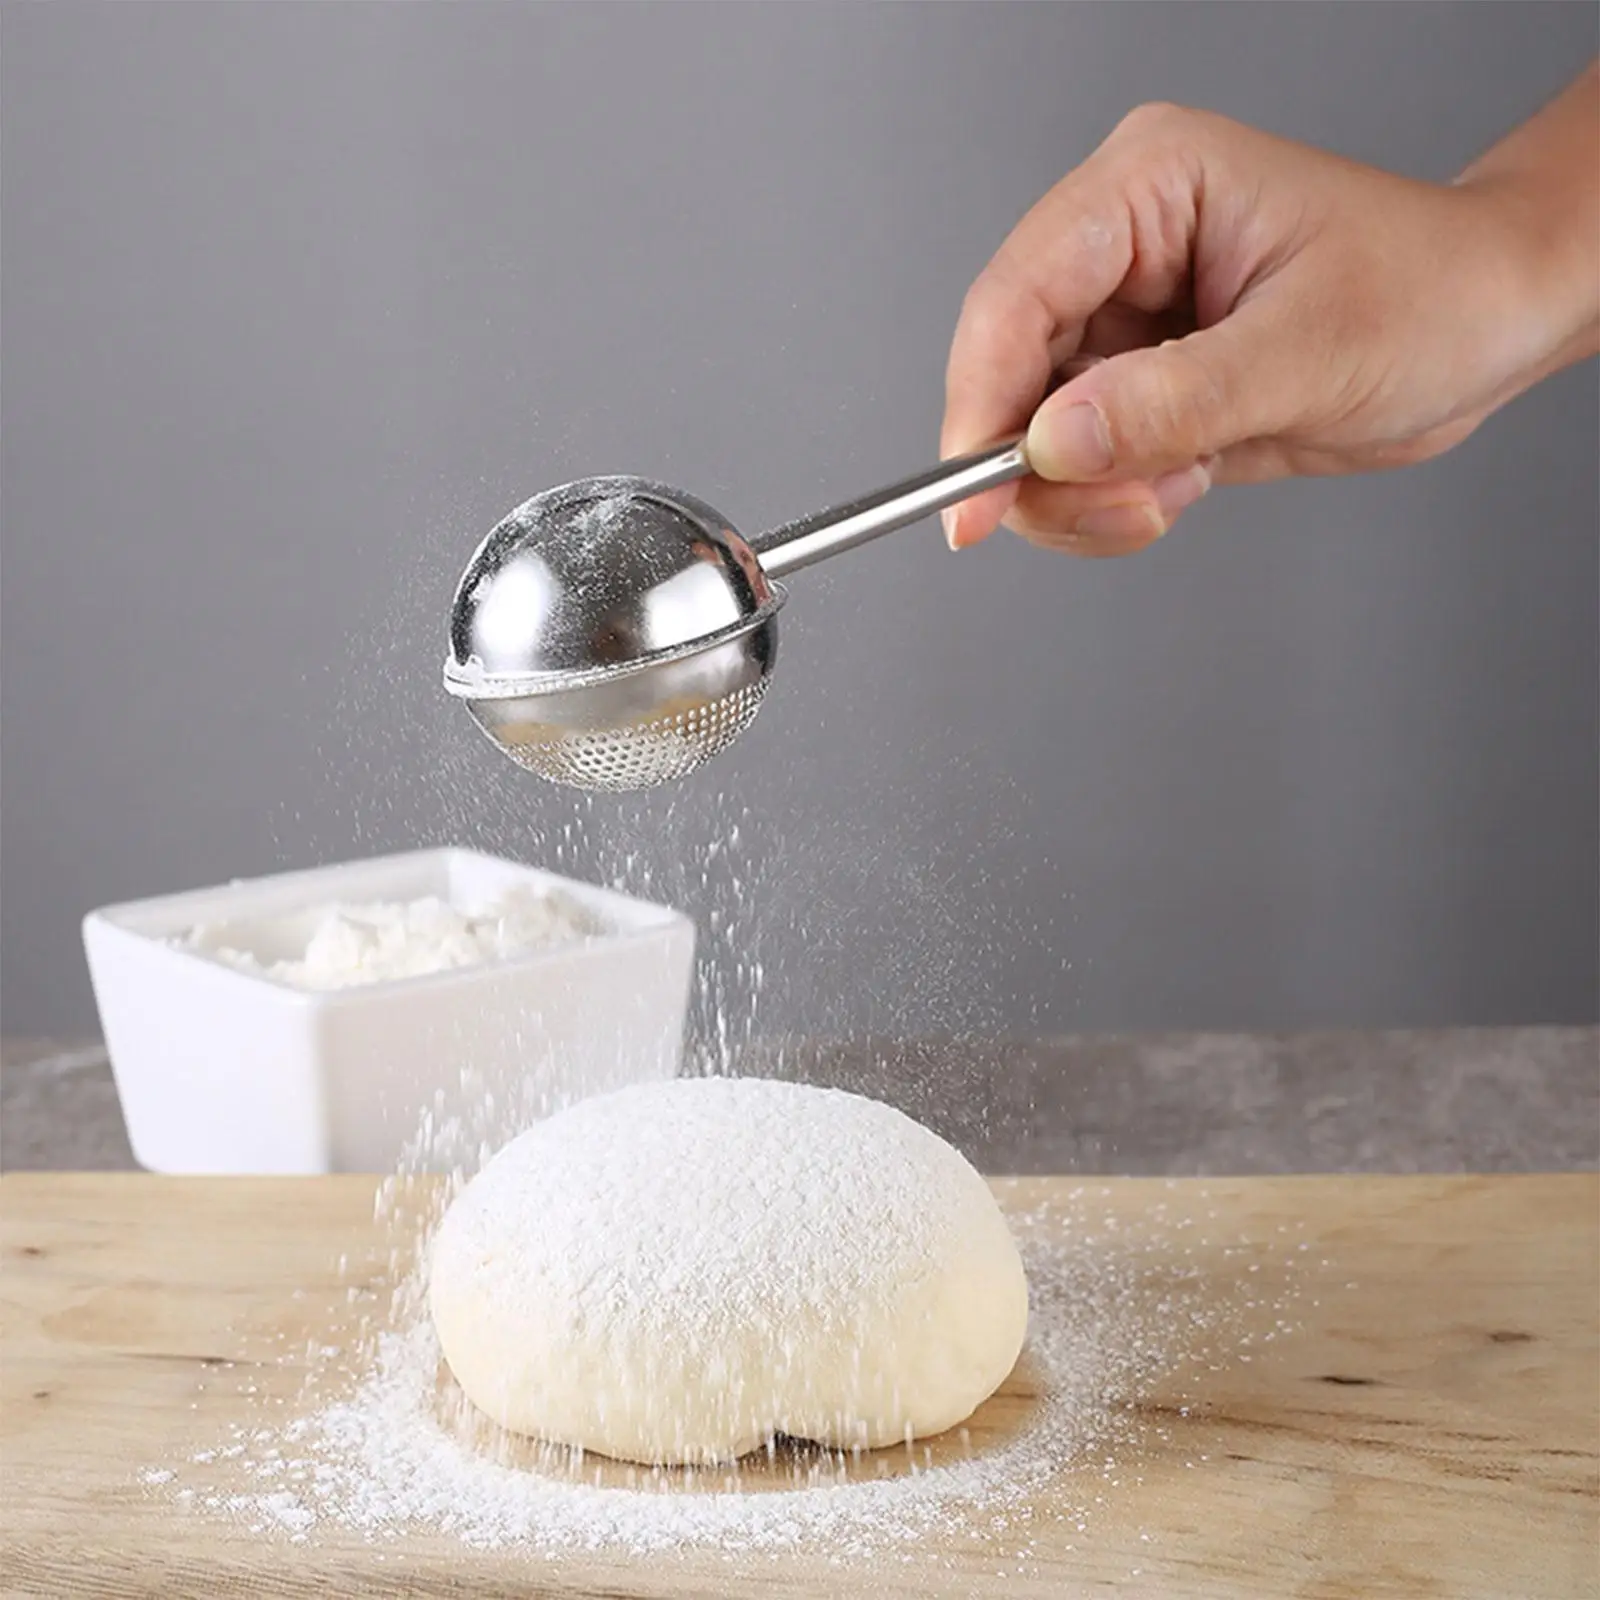 Stainless Steel Flour Sieve Dishwasher Safe Manual Telescopic Powder Spreader for Pastry Cake Decor Tool Home Kitchen Baking